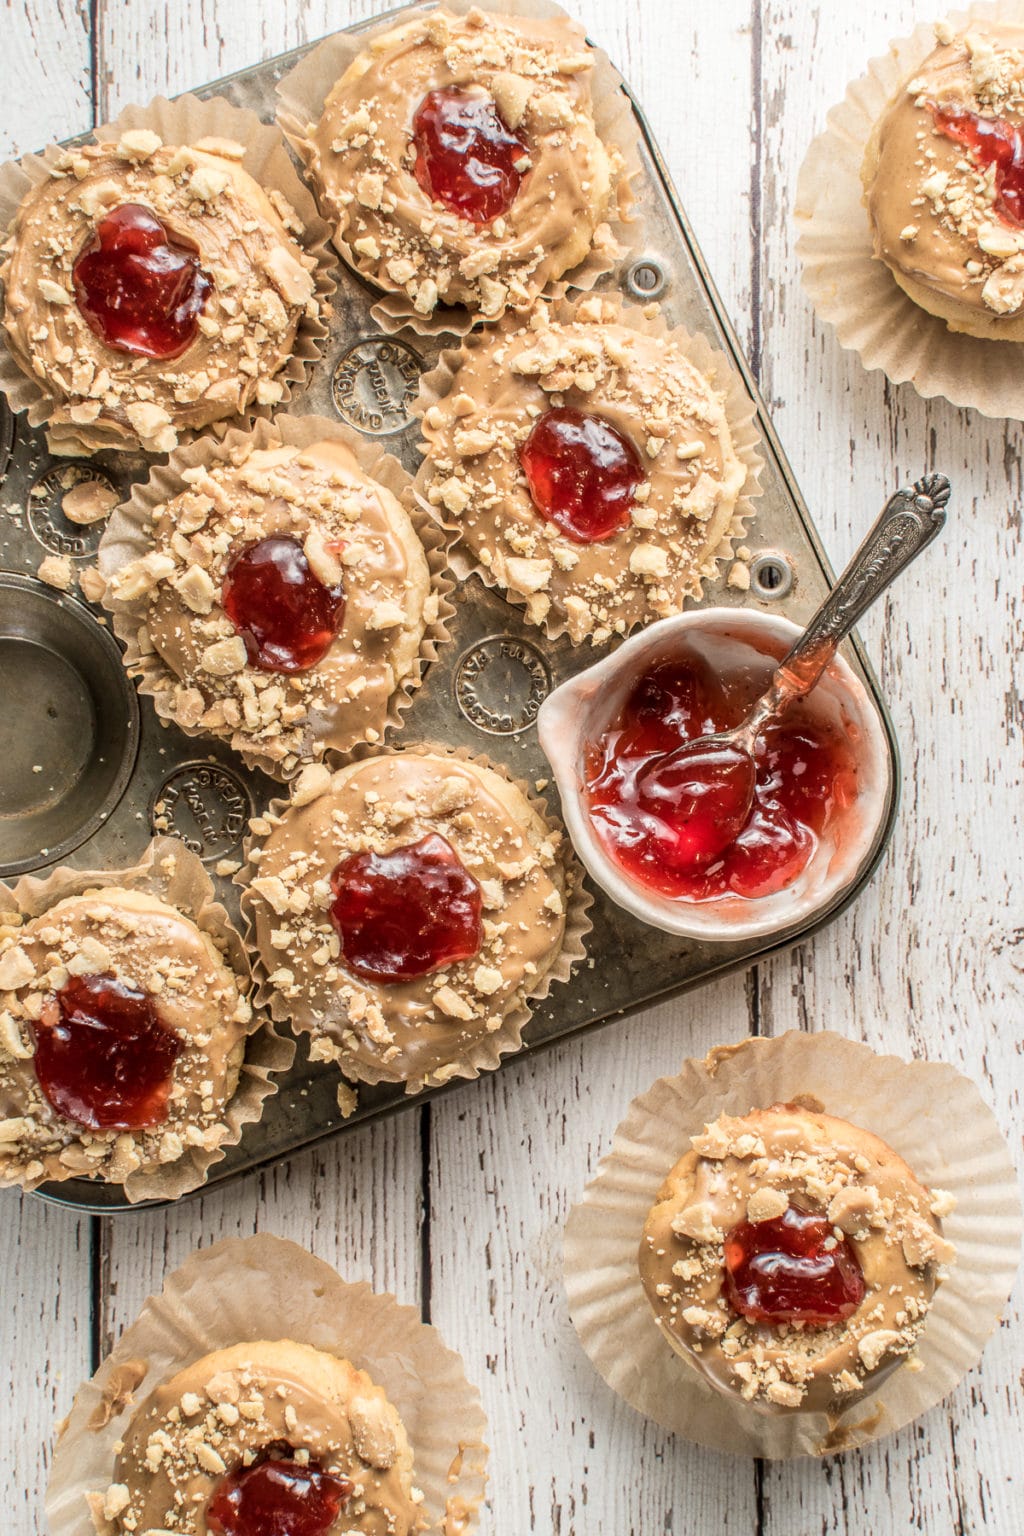 PB&J muffins in a vintage muffin tin with a small bowl of strawberry jam